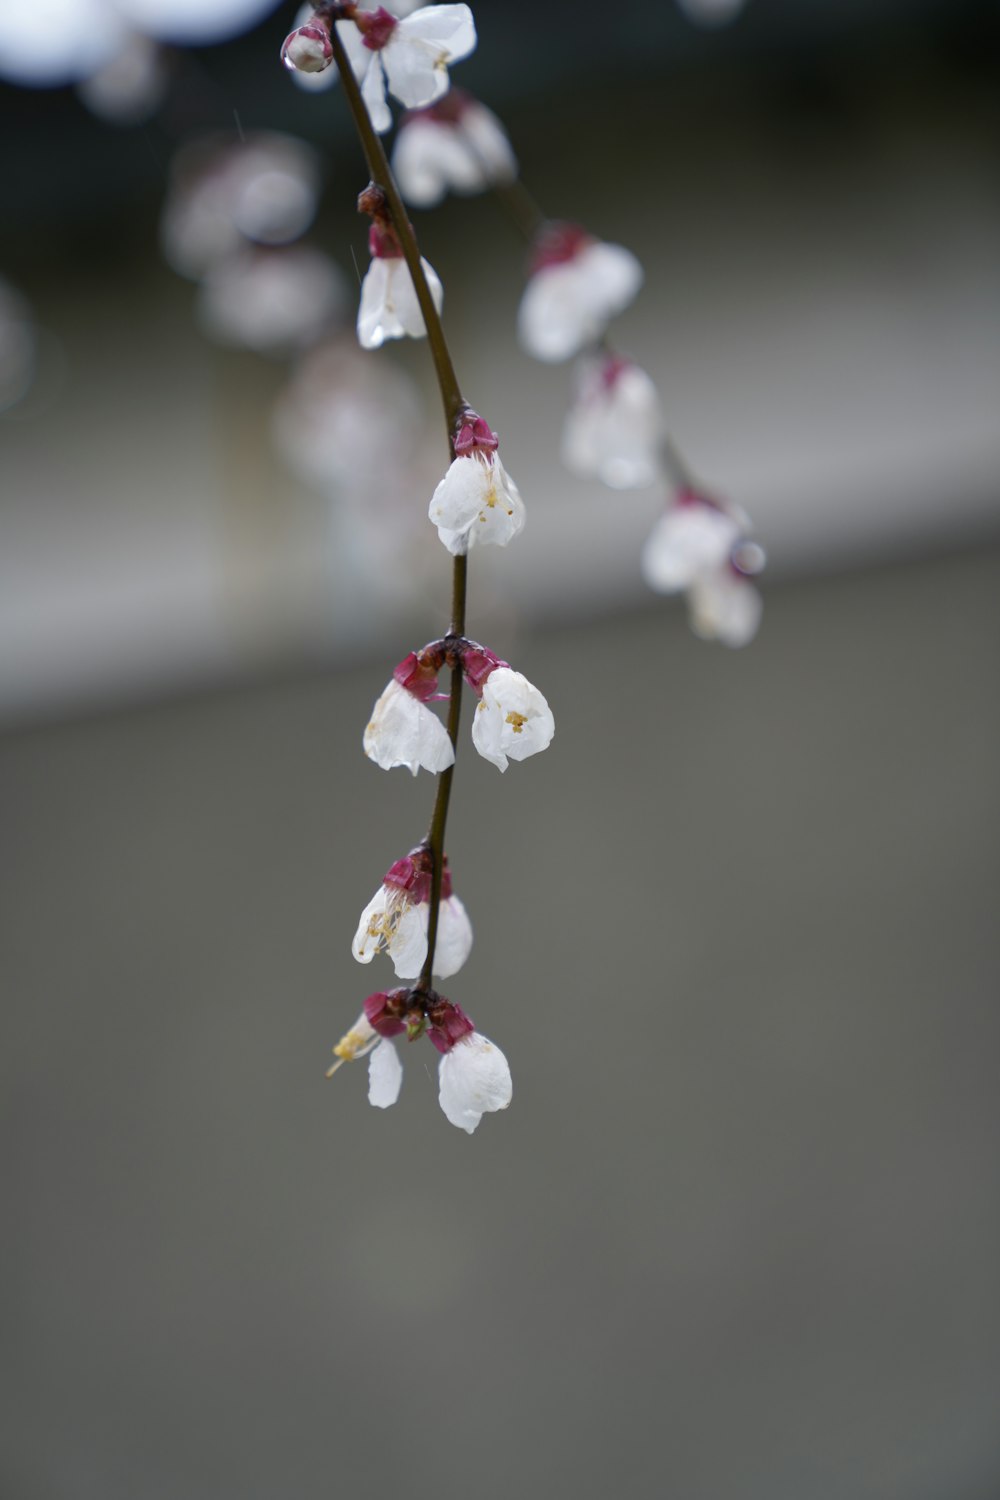 a branch with white flowers hanging from it